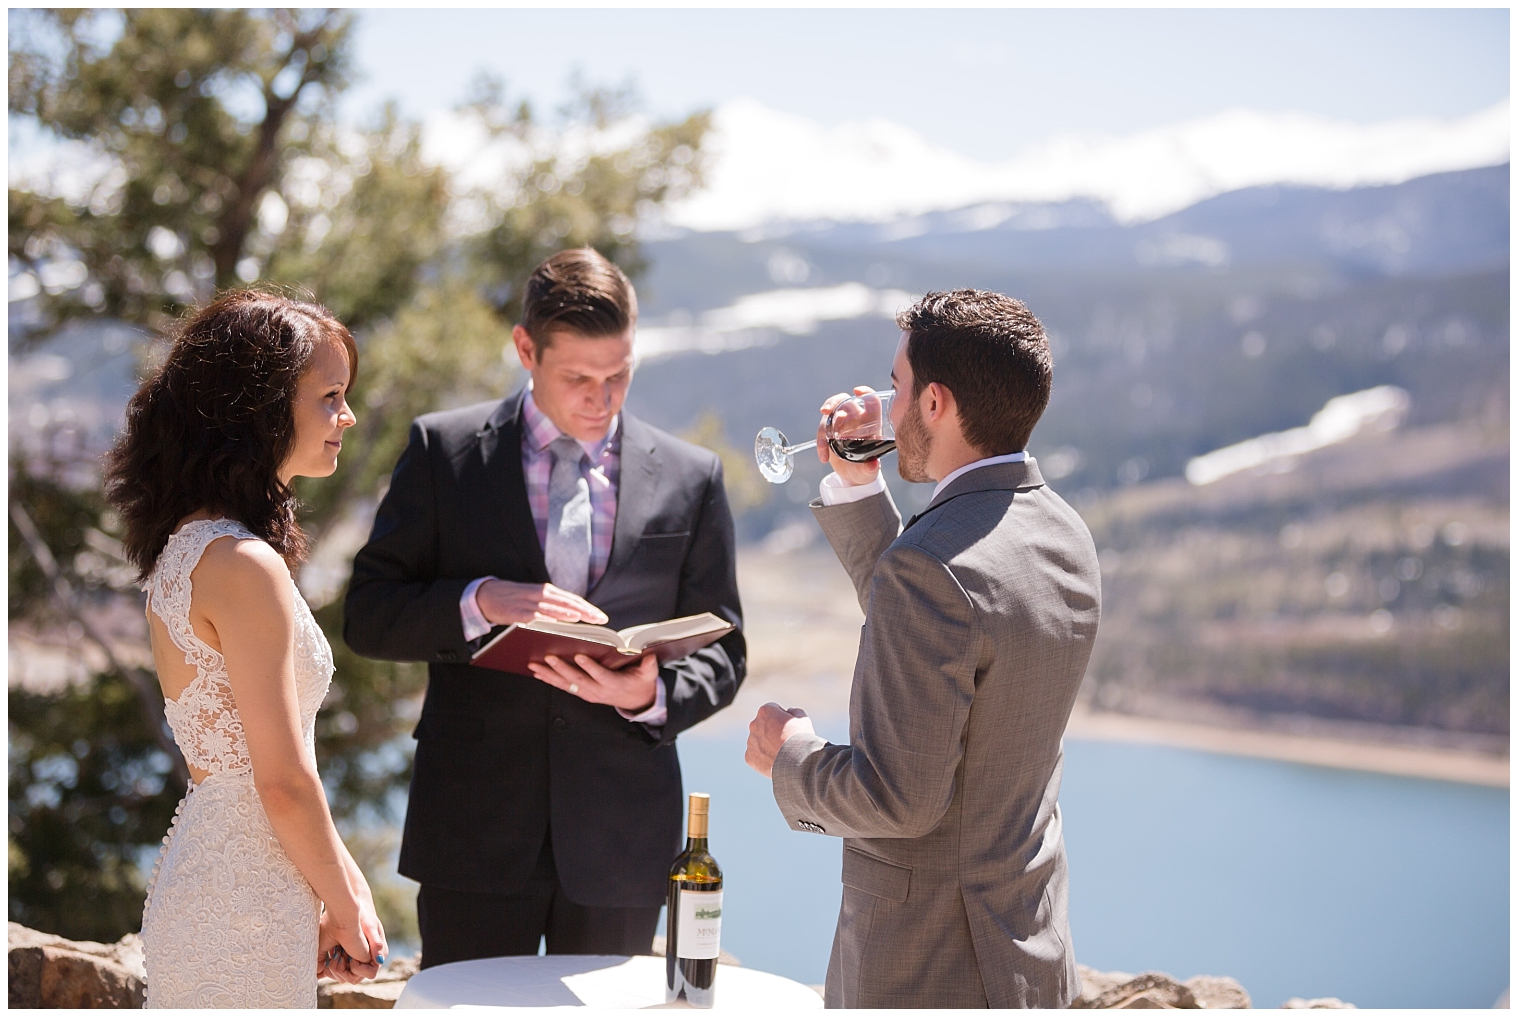 Groom drinks wine during a wine unity ritual at his Breckenridge elopement.